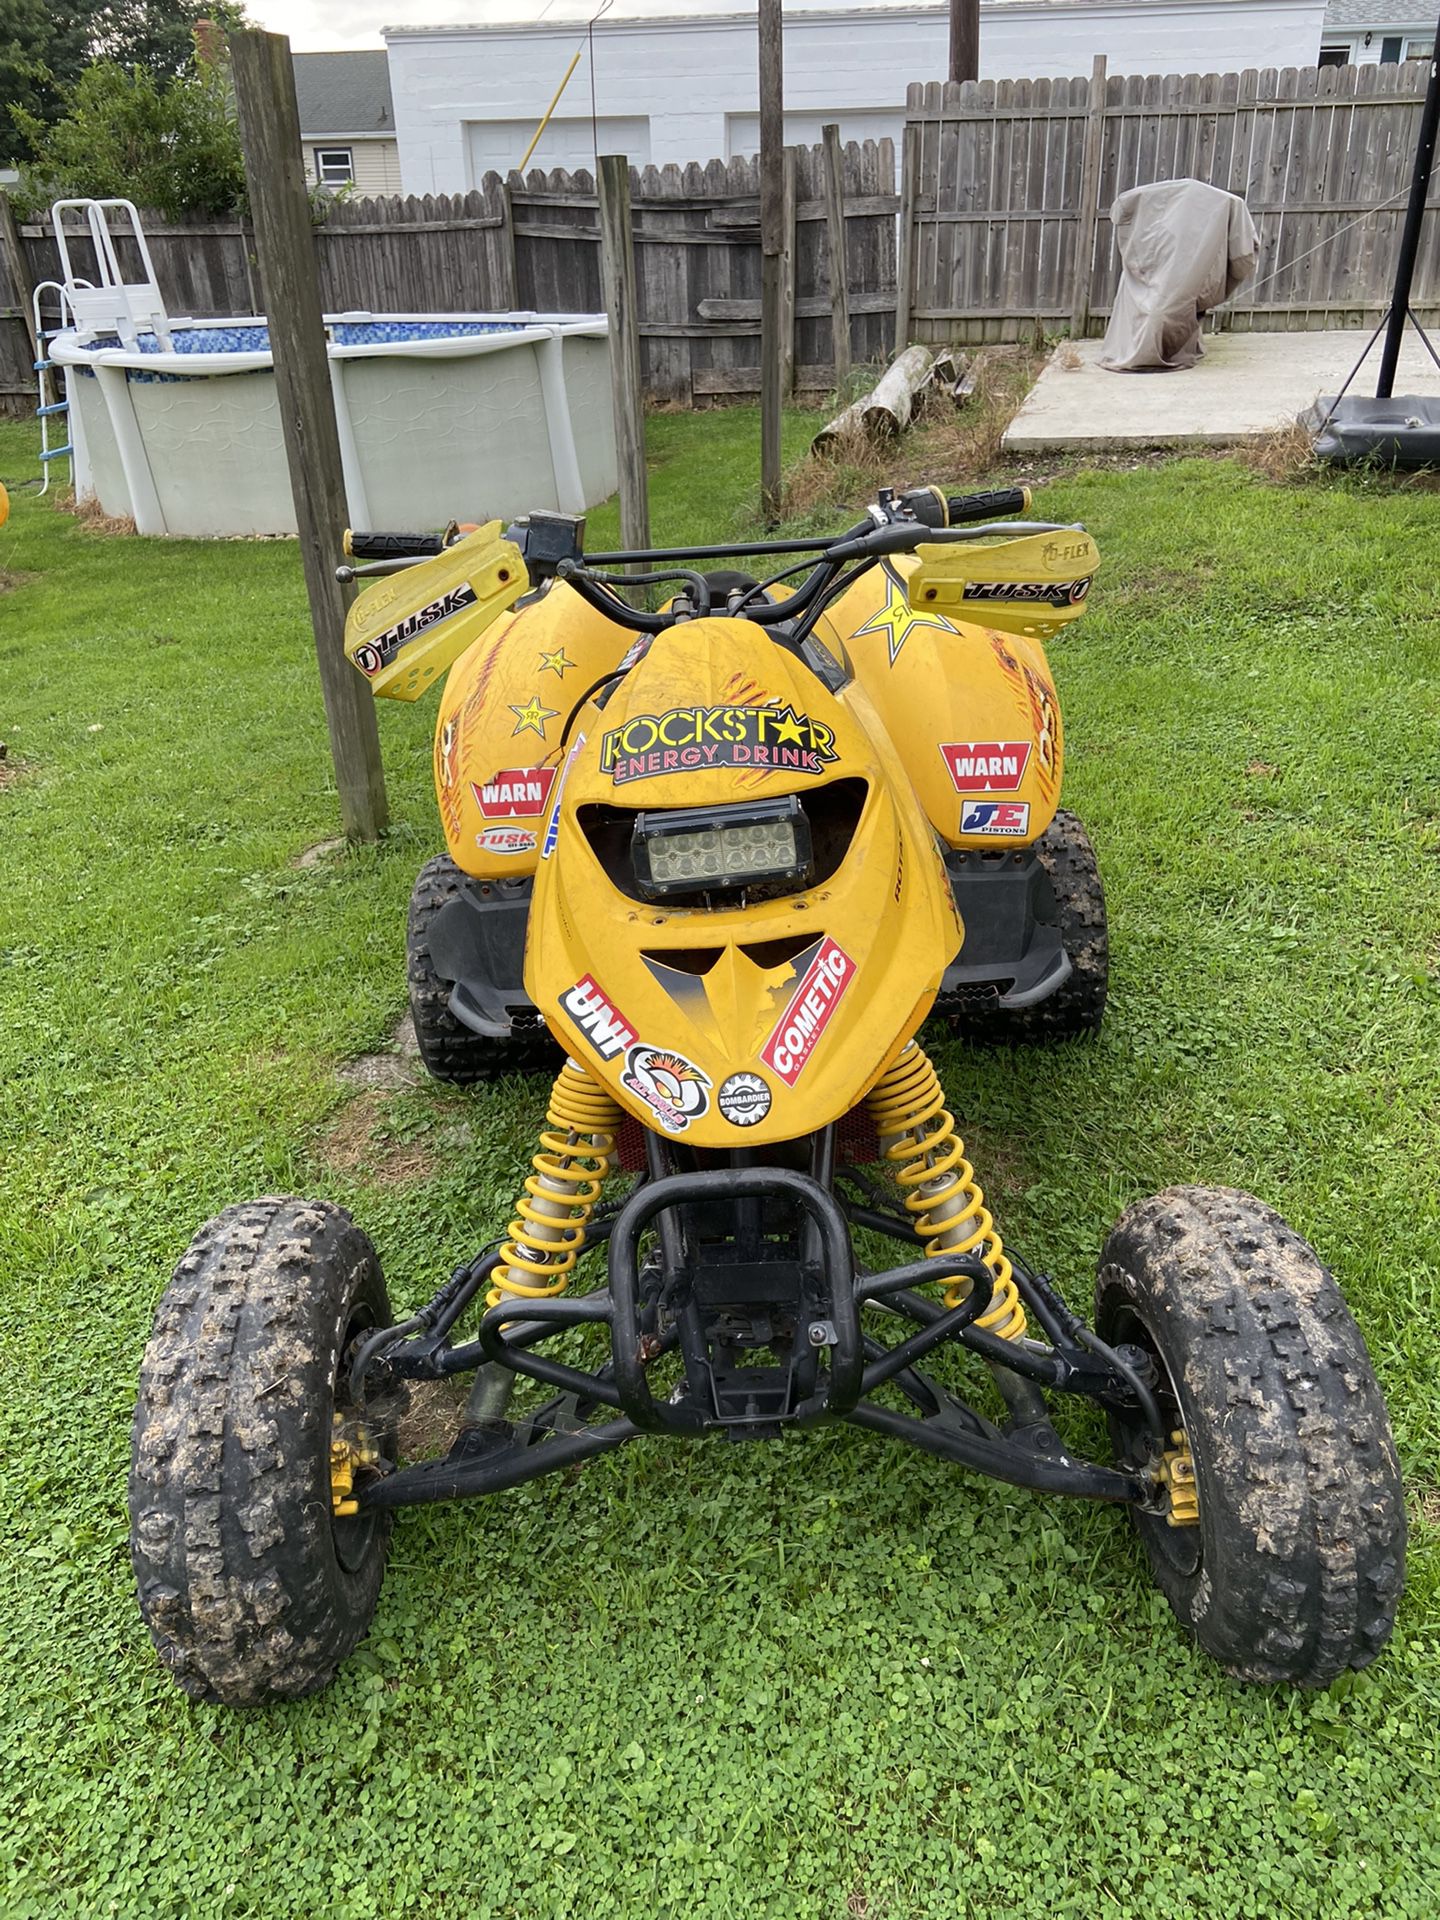 2004 can am bombardier